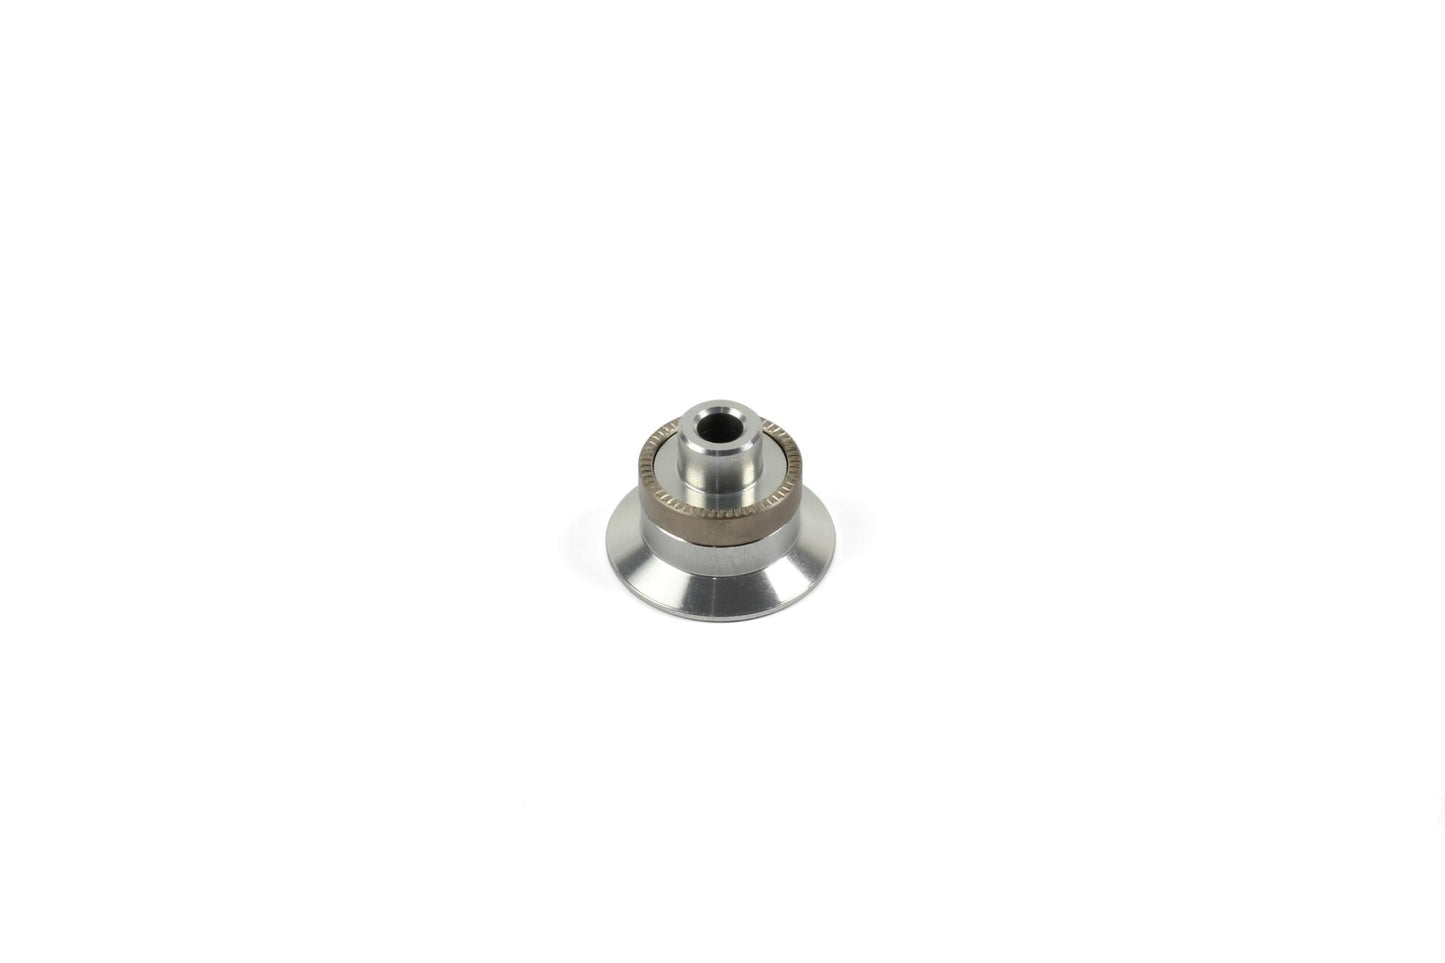 Hope Pro 2 Drive-Side Spacer Qr - Silver